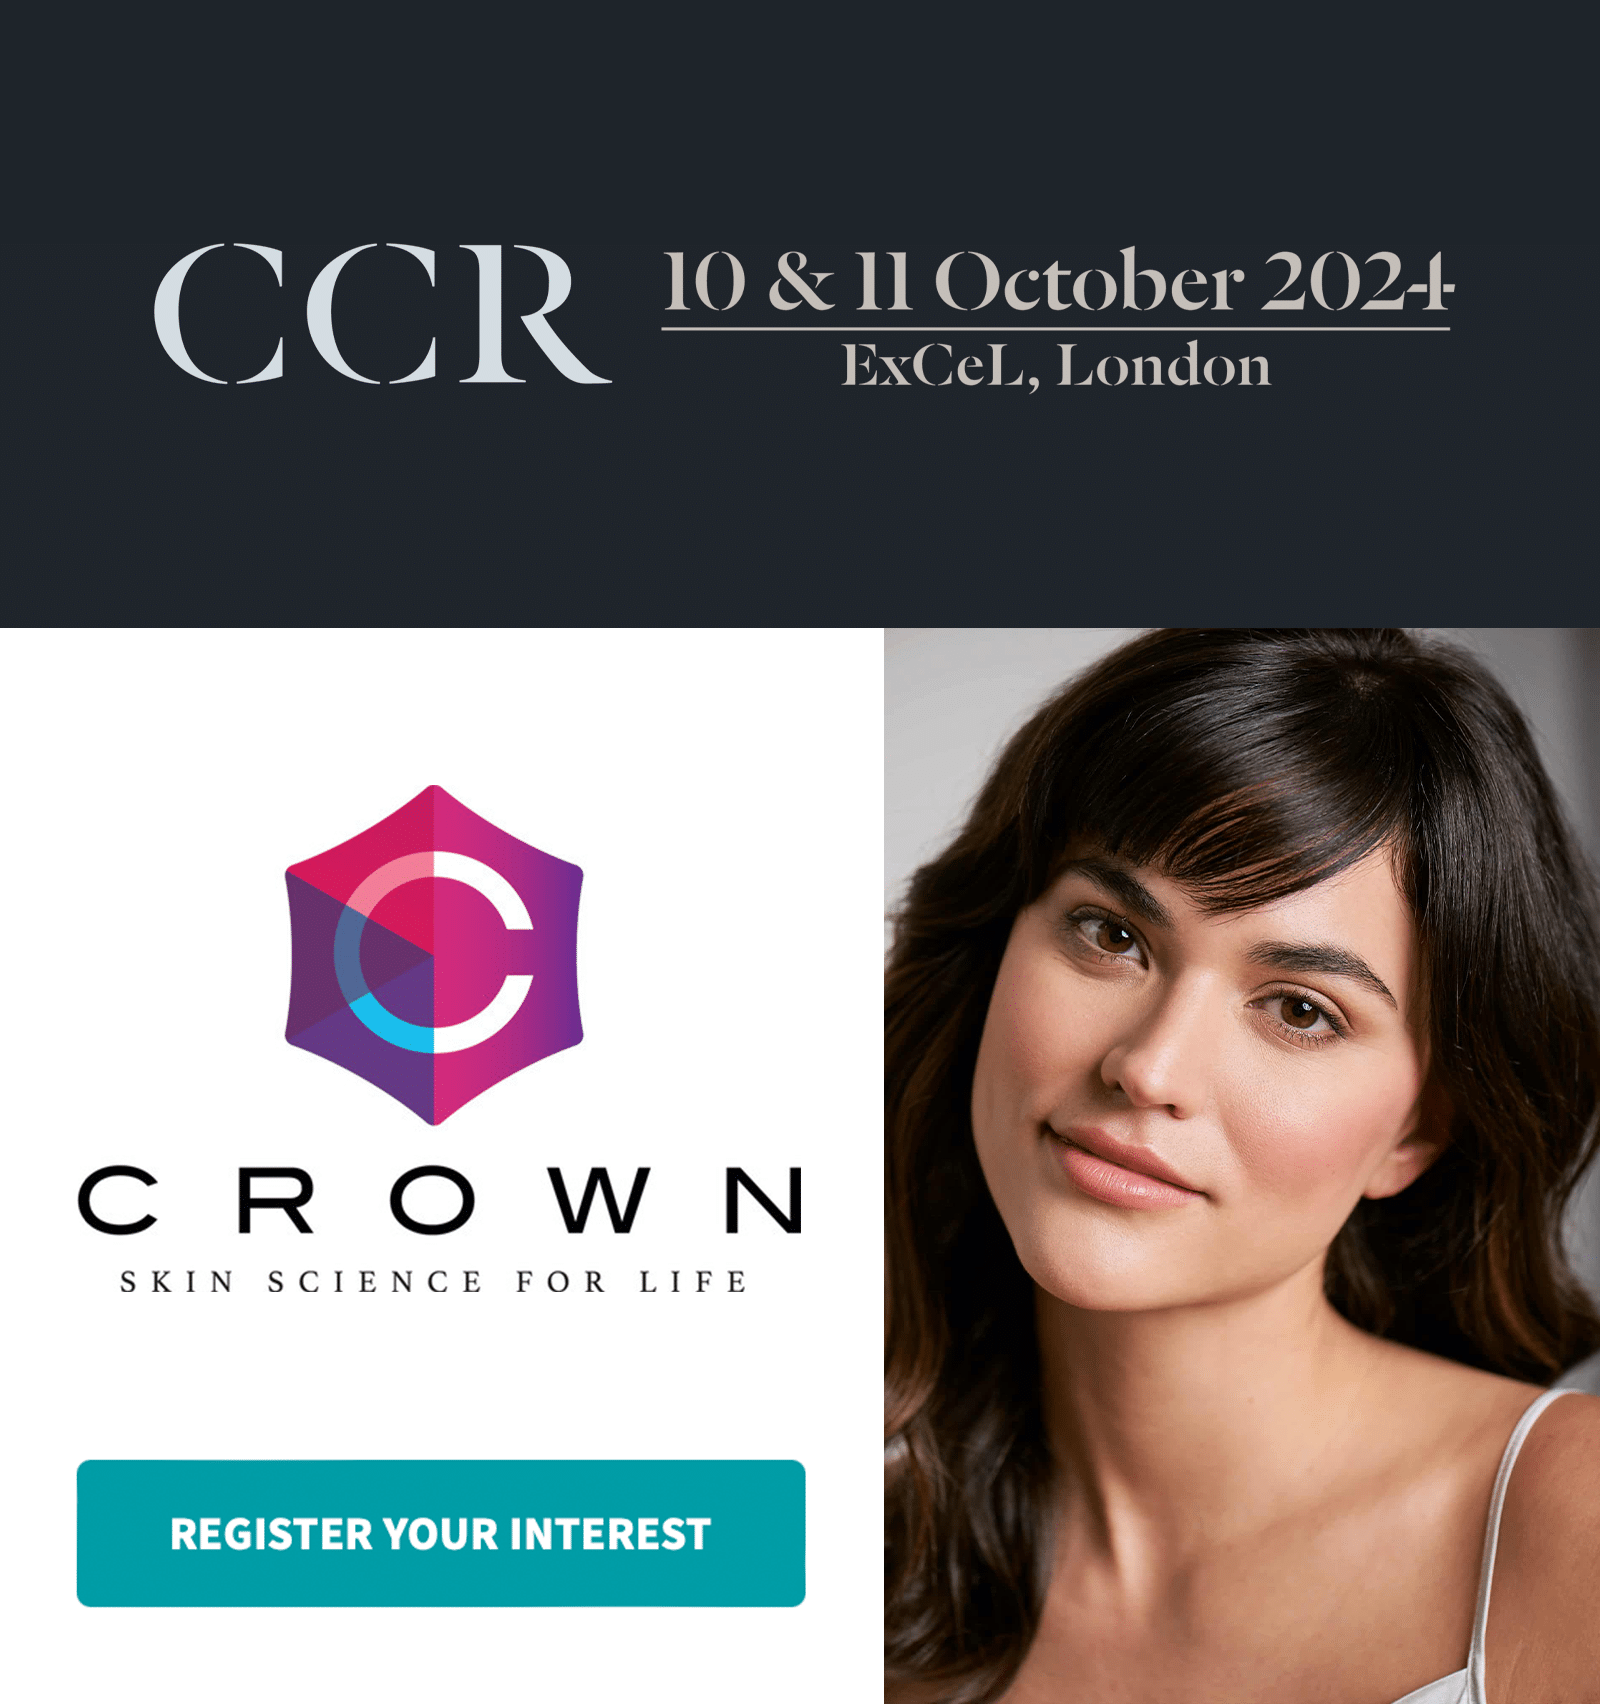 JOIN US AT THE CCR CONFERENCE 10TH & 11TH OCTOBER 2024 EXCEL LONDON